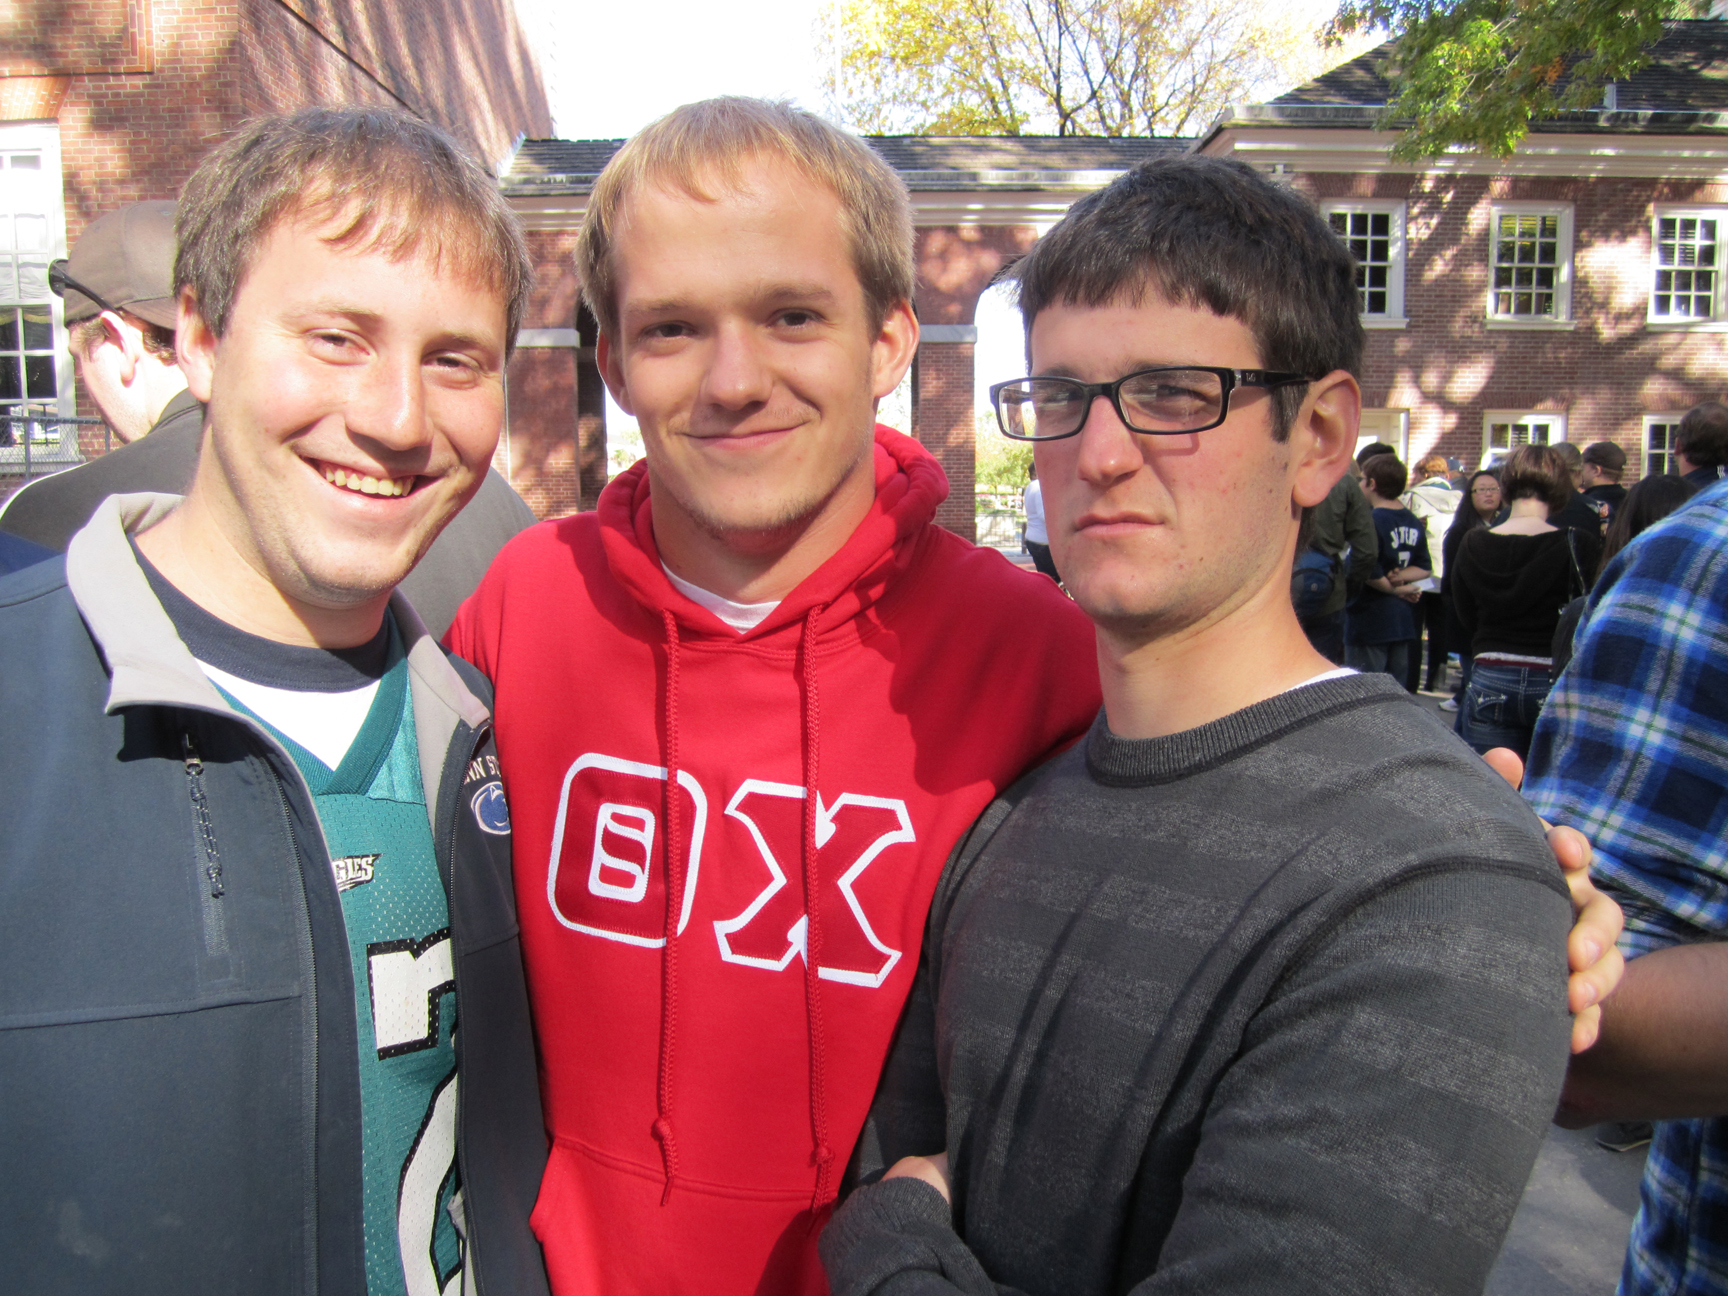  L to R: Jeremy Railing, Gerad Freeman, and Nick Lello in front of Independence Hall
Fall 2011 